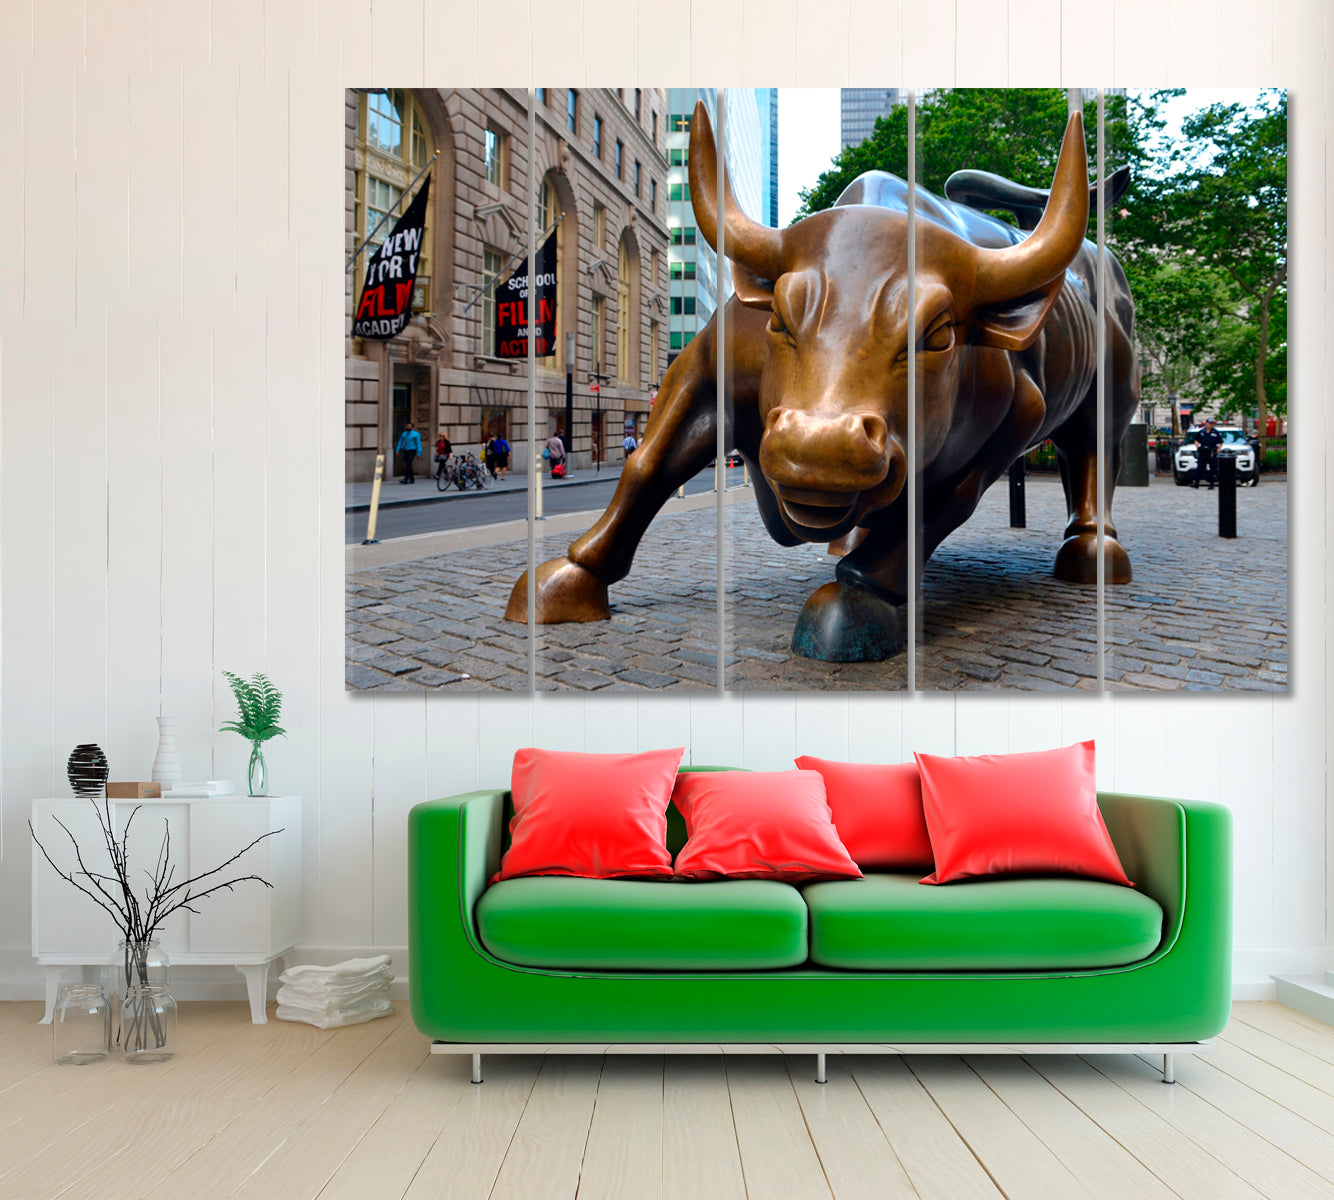 Wall Street Charging Bull Sculpture Canvas Print ArtLexy 5 Panels 36"x24" inches 